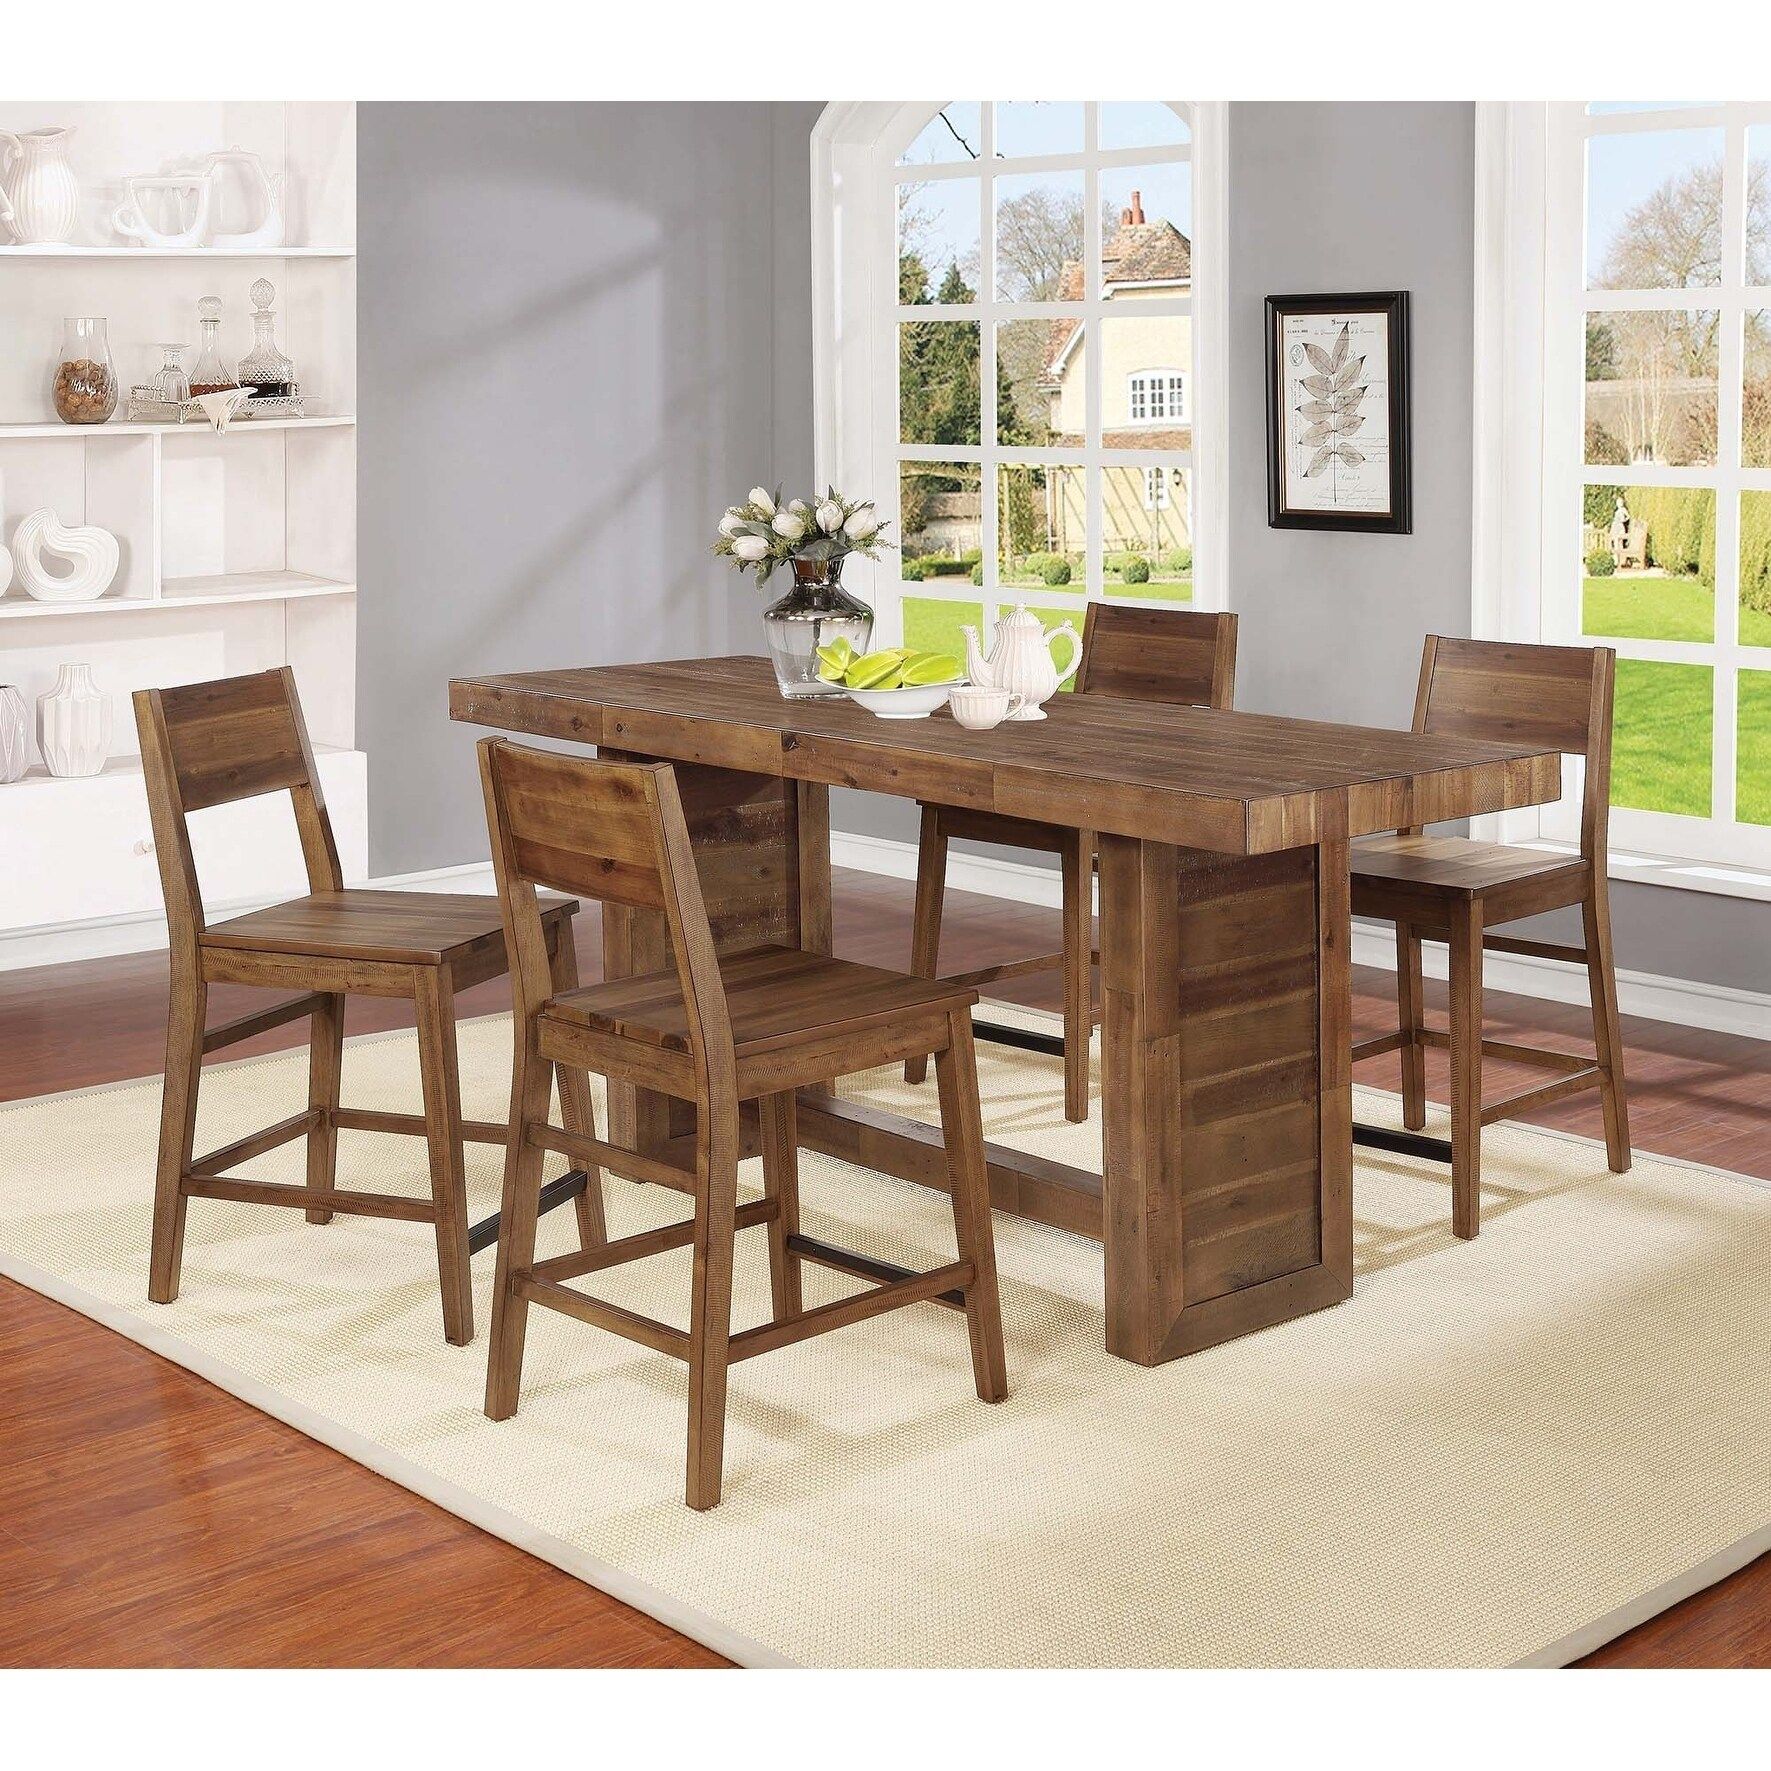 Maximize Your Dining Space with Counter Height Rectangular Table Sets